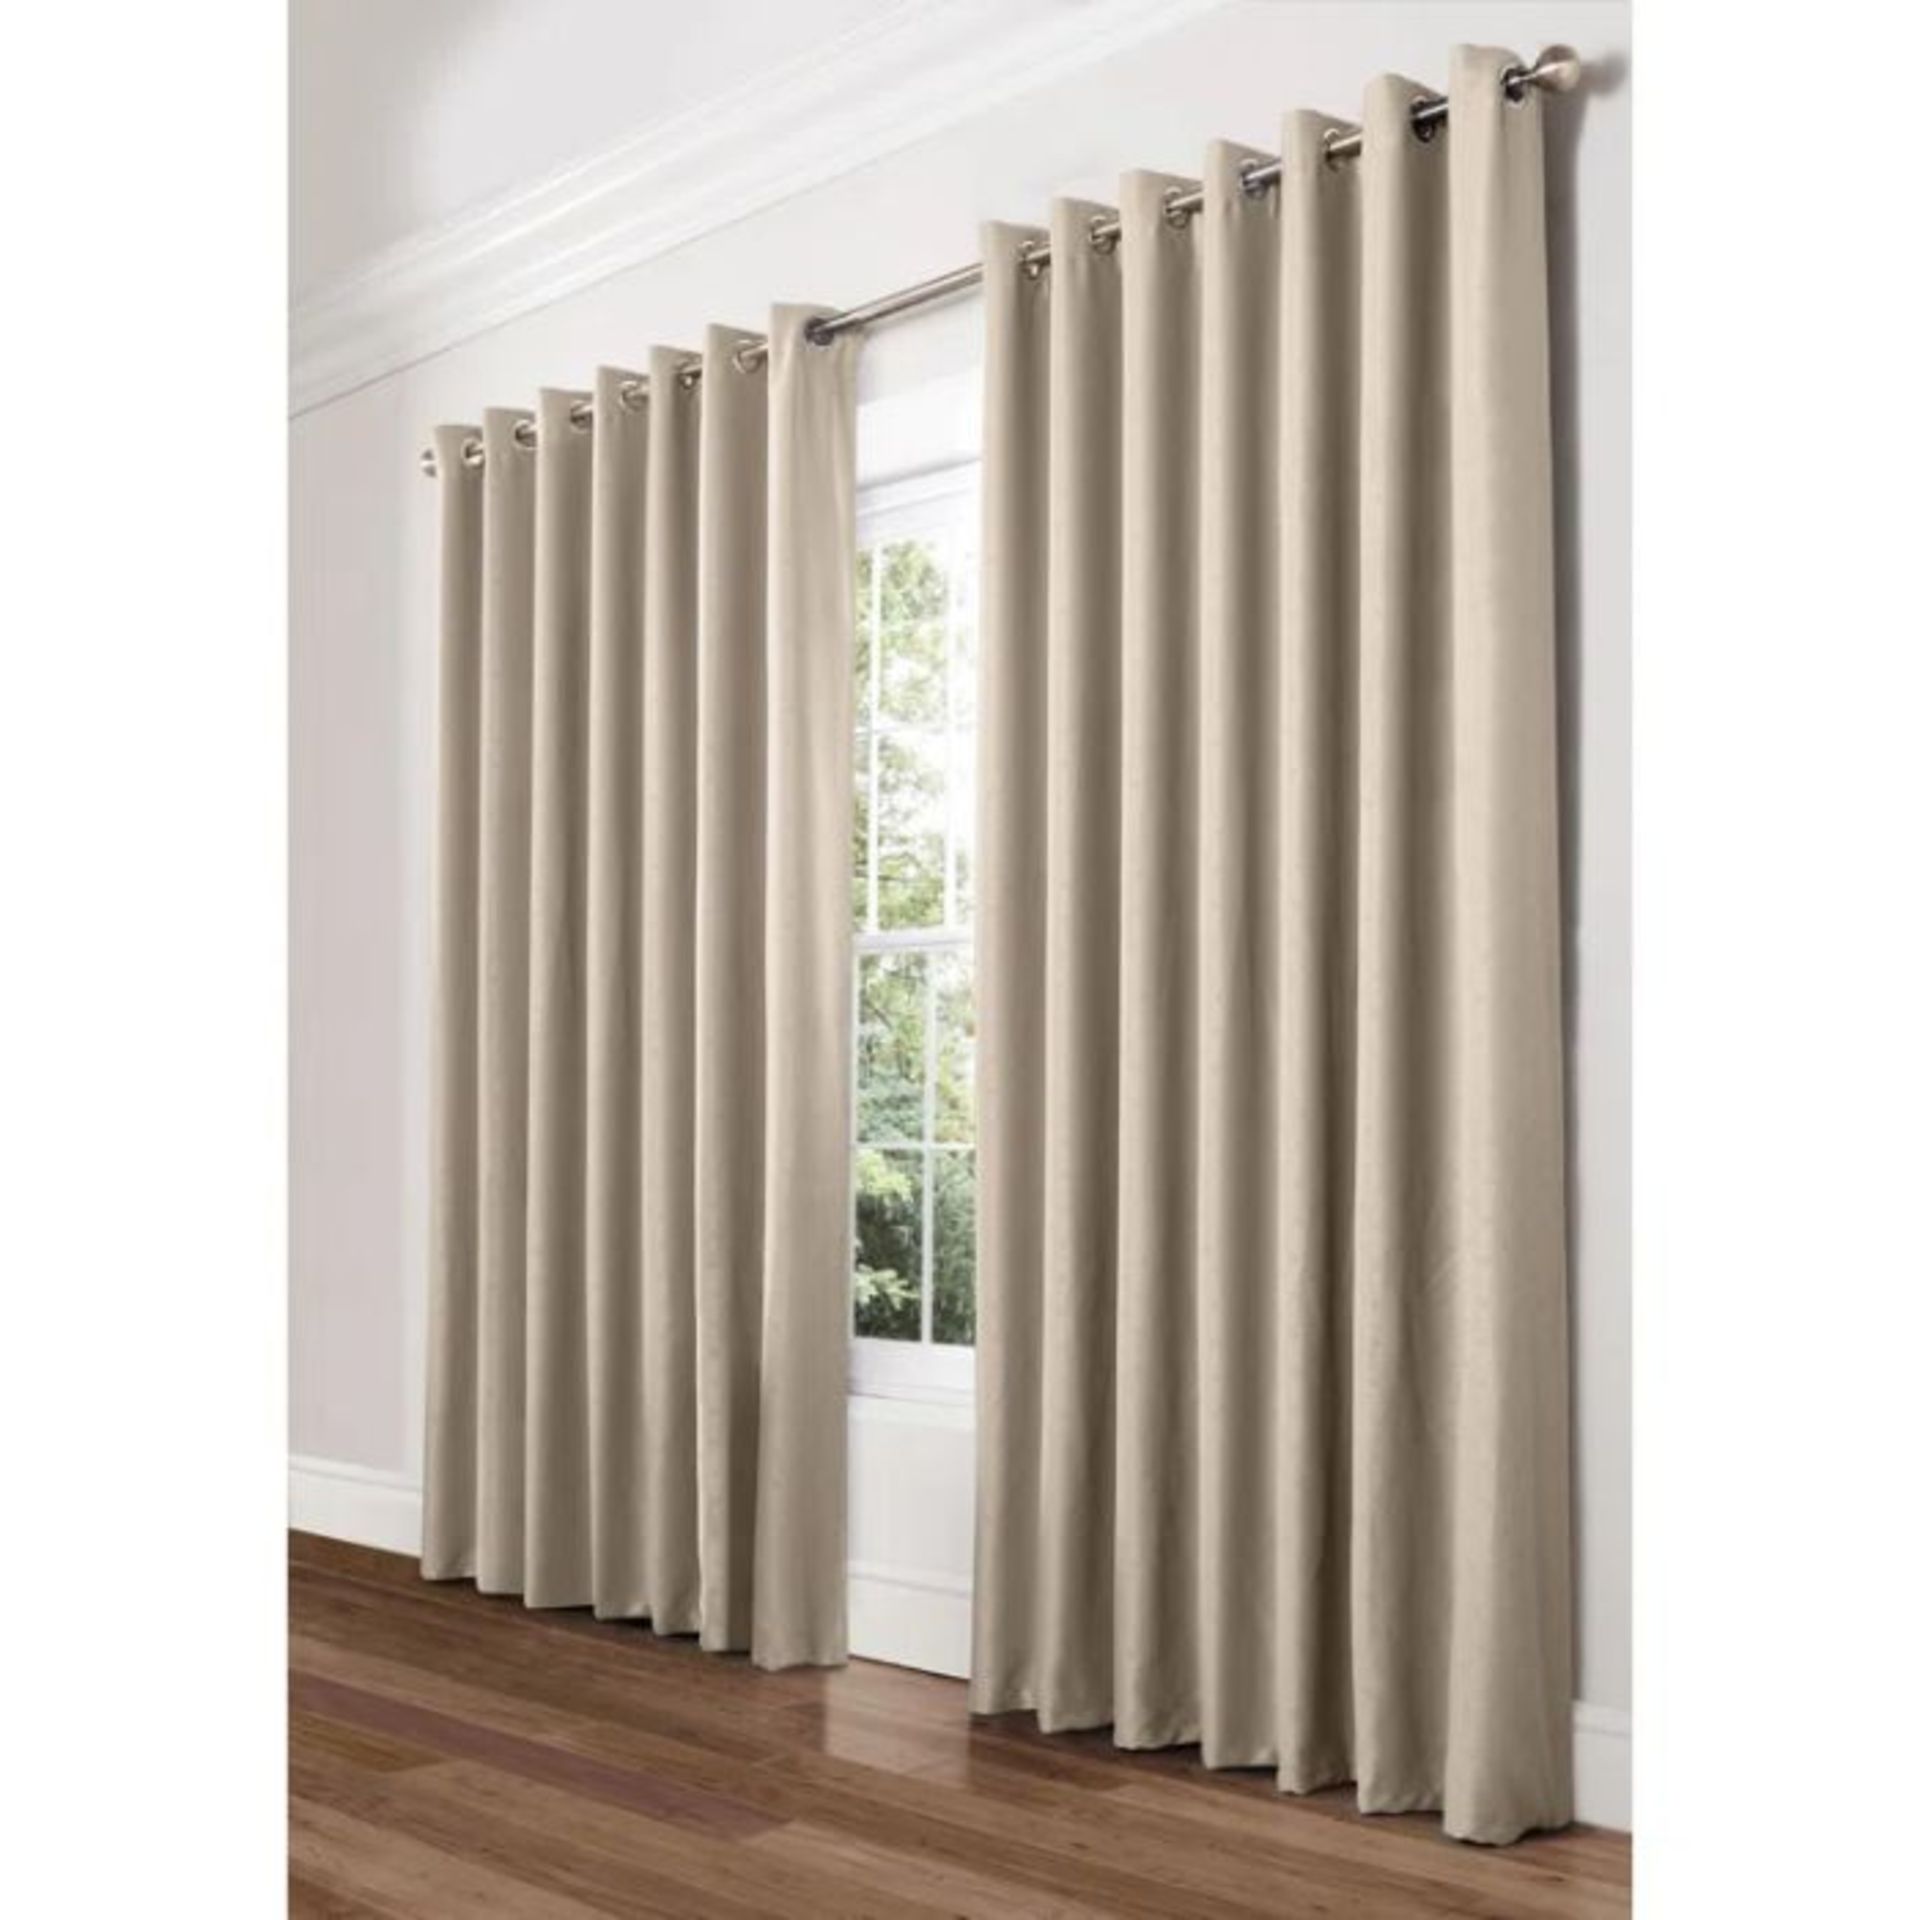 Ebern Designs, Frodine Thermal Blackout Curtain (CREAM) (229 W x 183 D cm) - RRP£46.59(HFFA1042 - - Image 2 of 4